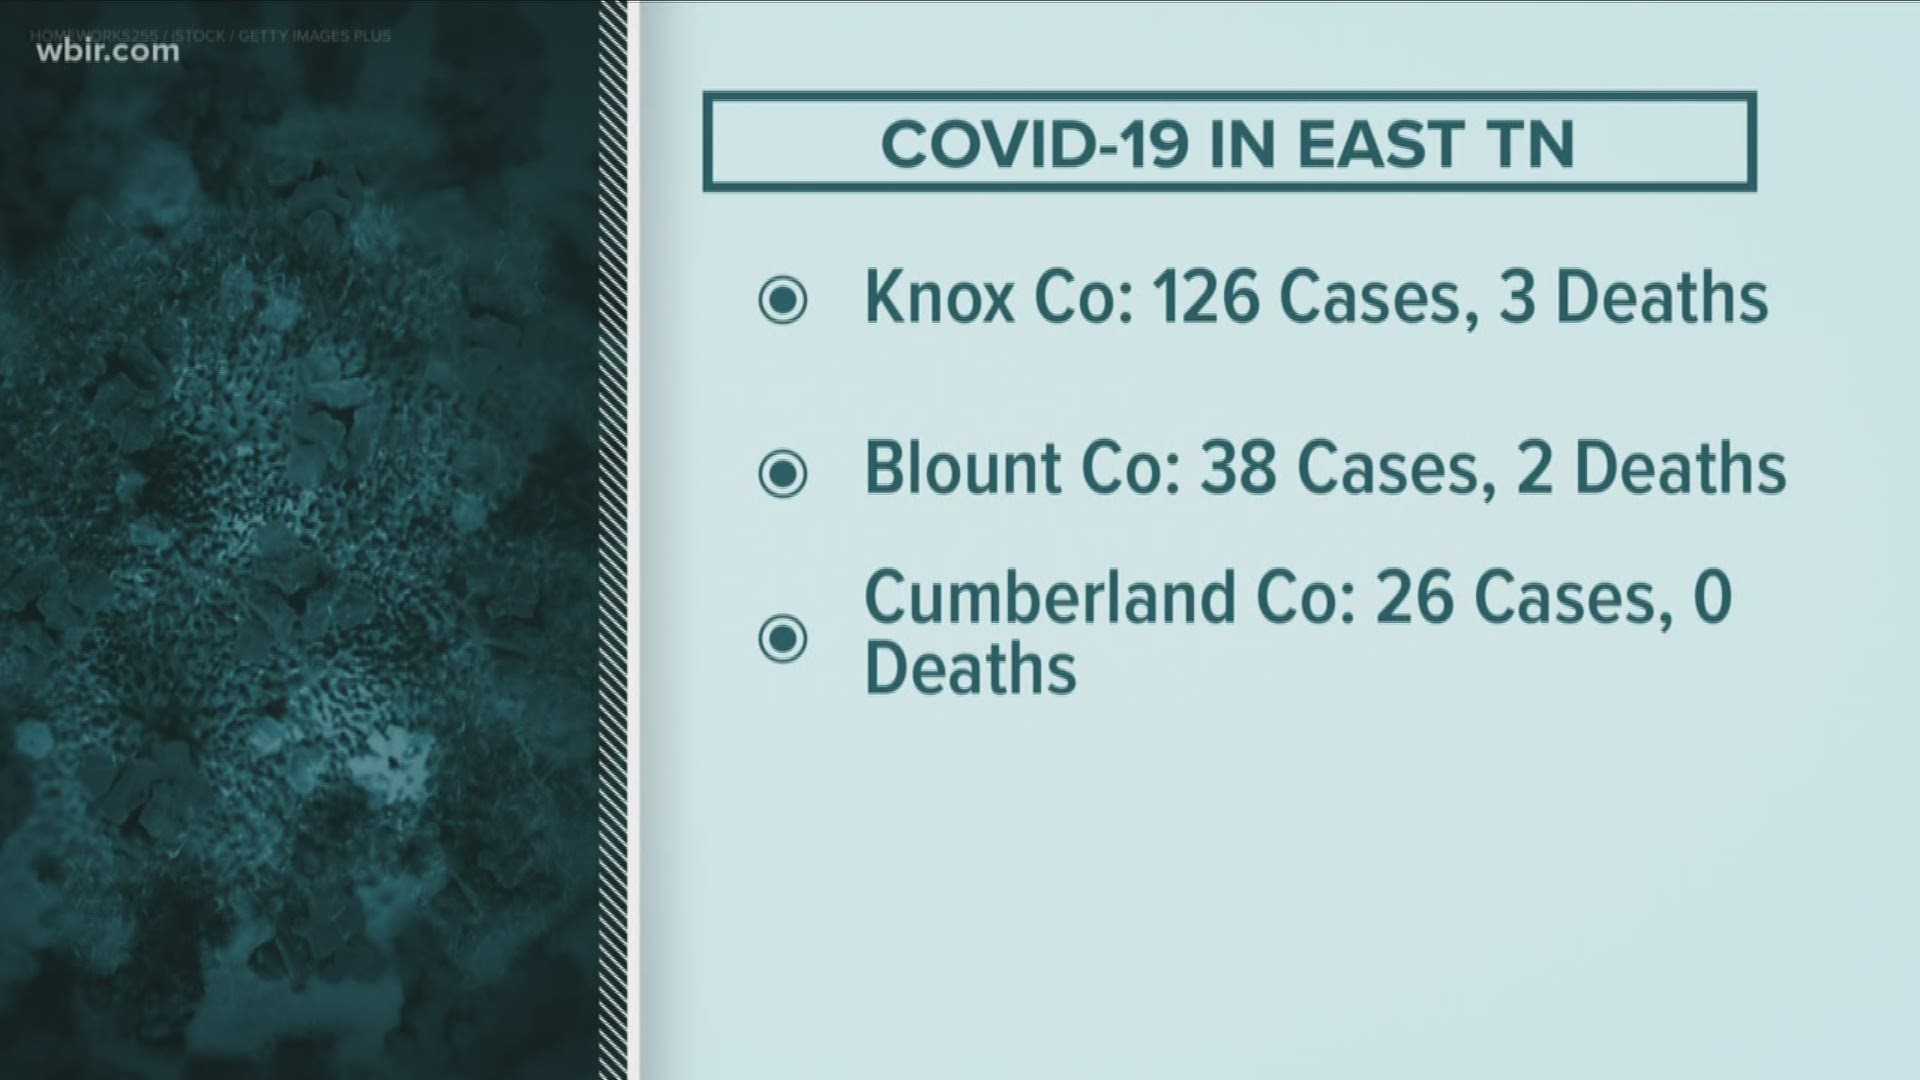 The number of confirmed COVID-19 cases in Tennessee continue to rise.